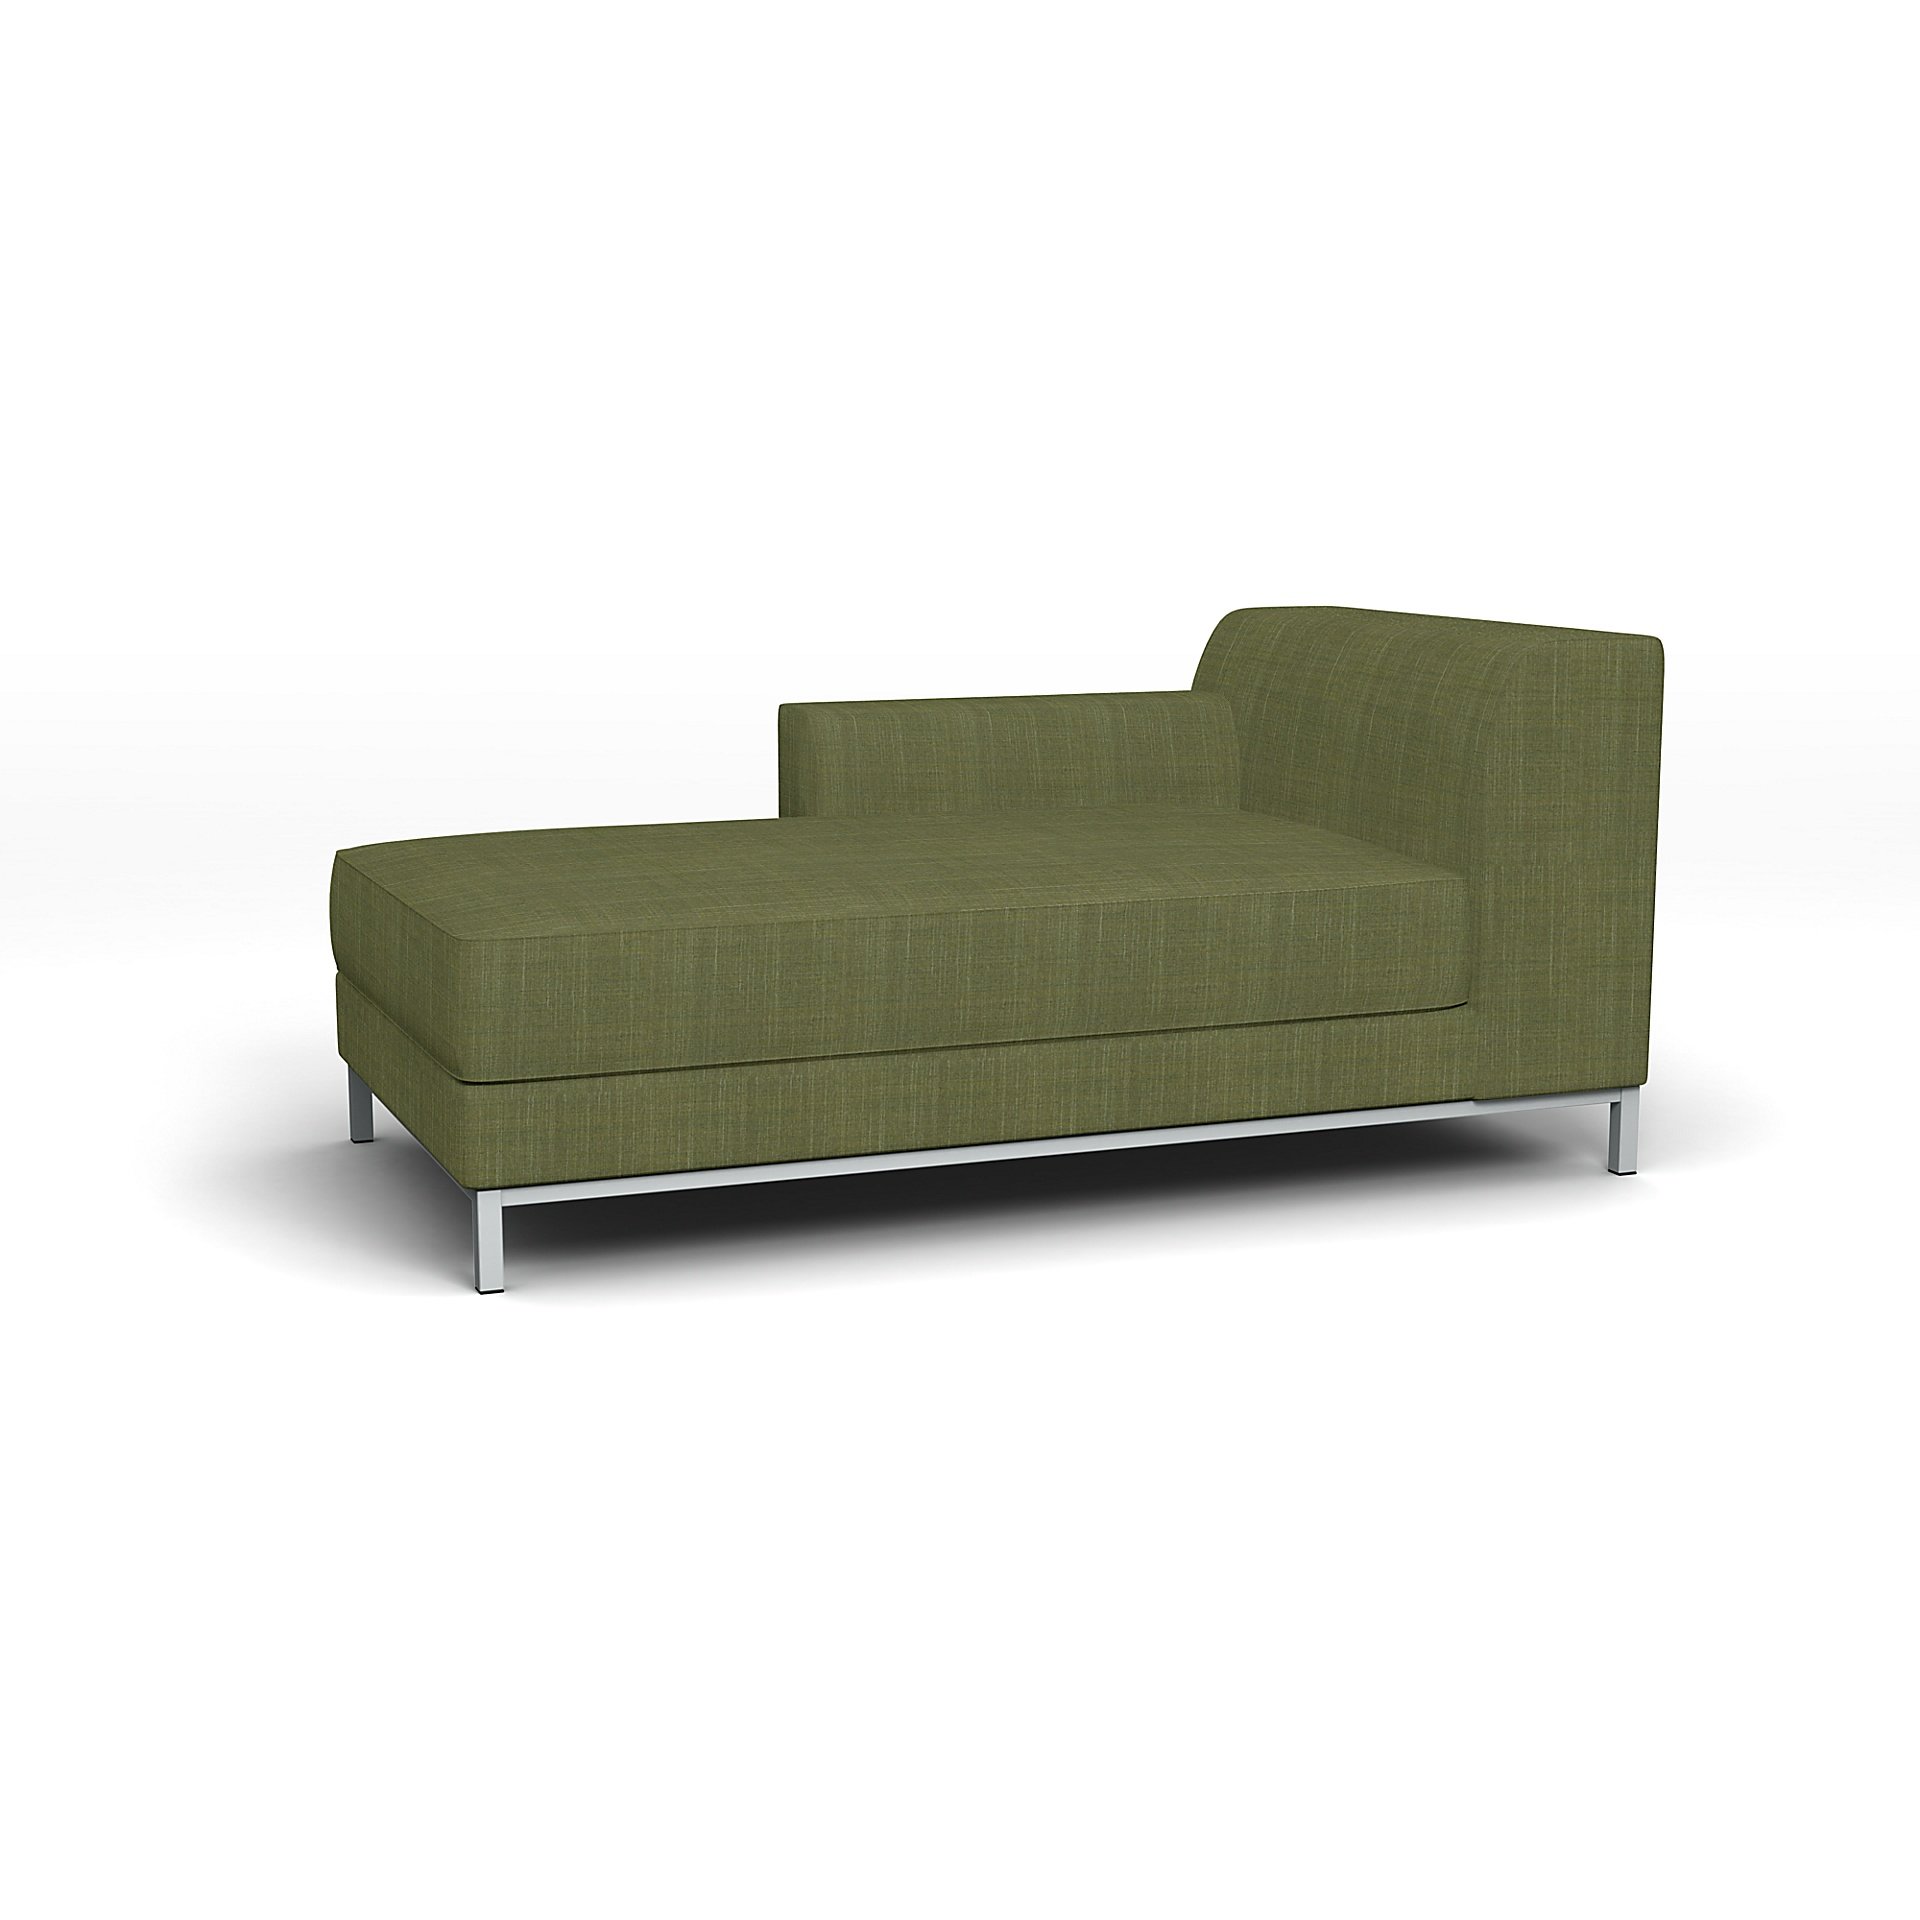 IKEA - Kramfors Chaise Longue with Left Arm Cover, Moss Green, Boucle & Texture - Bemz